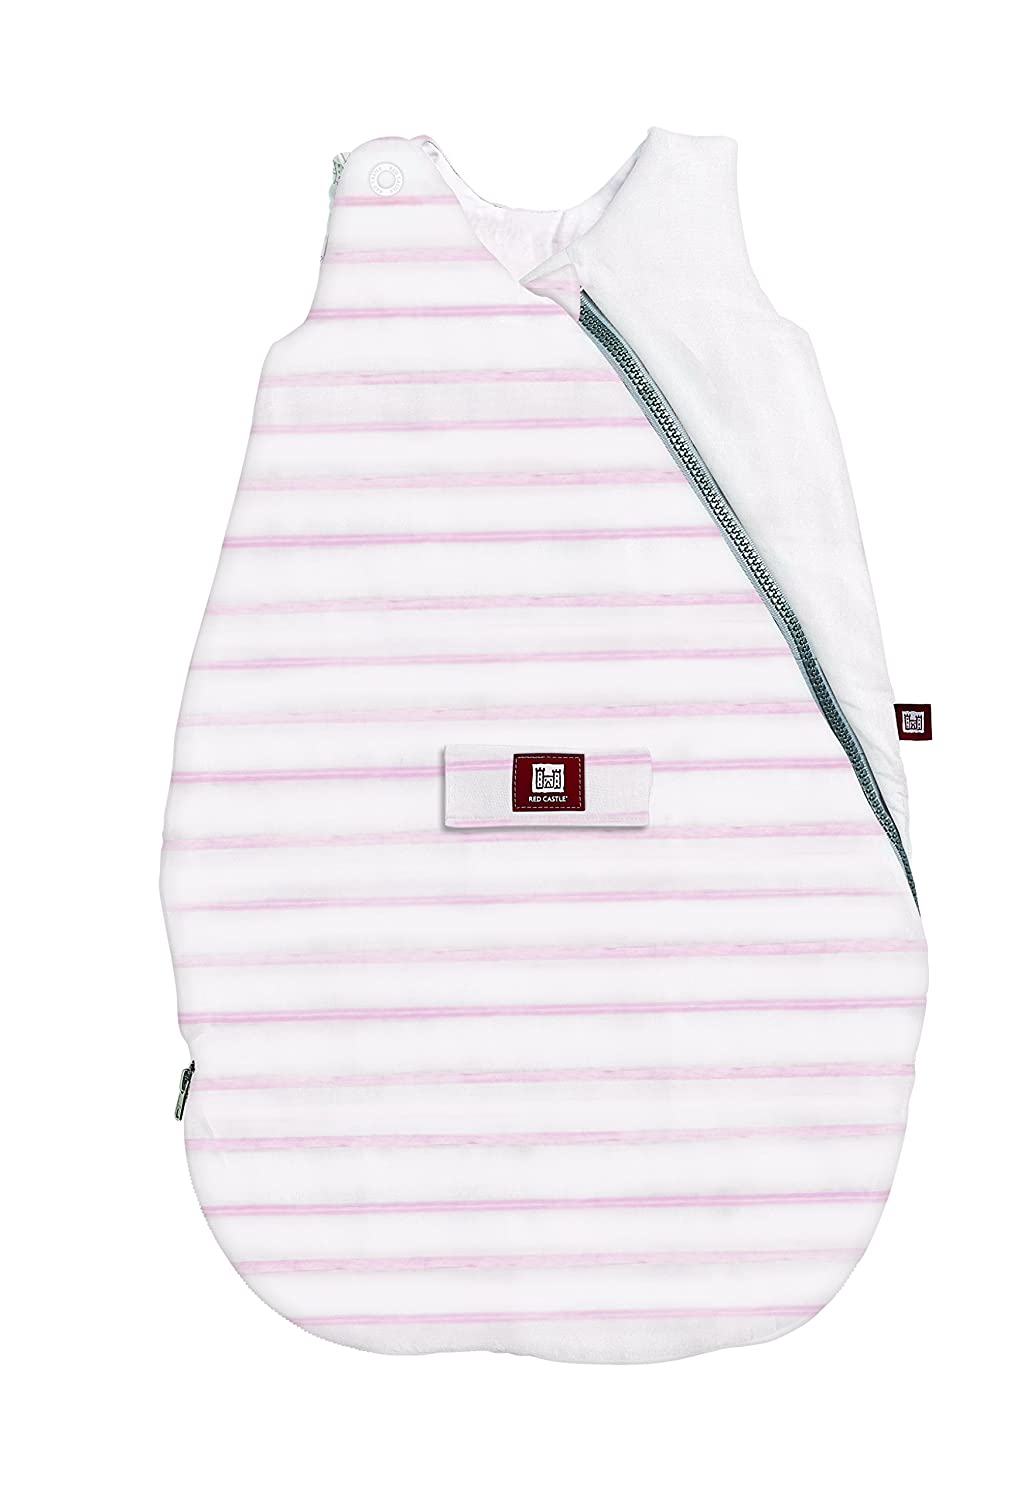 Red Castle Padded Baby Sleeping Bag